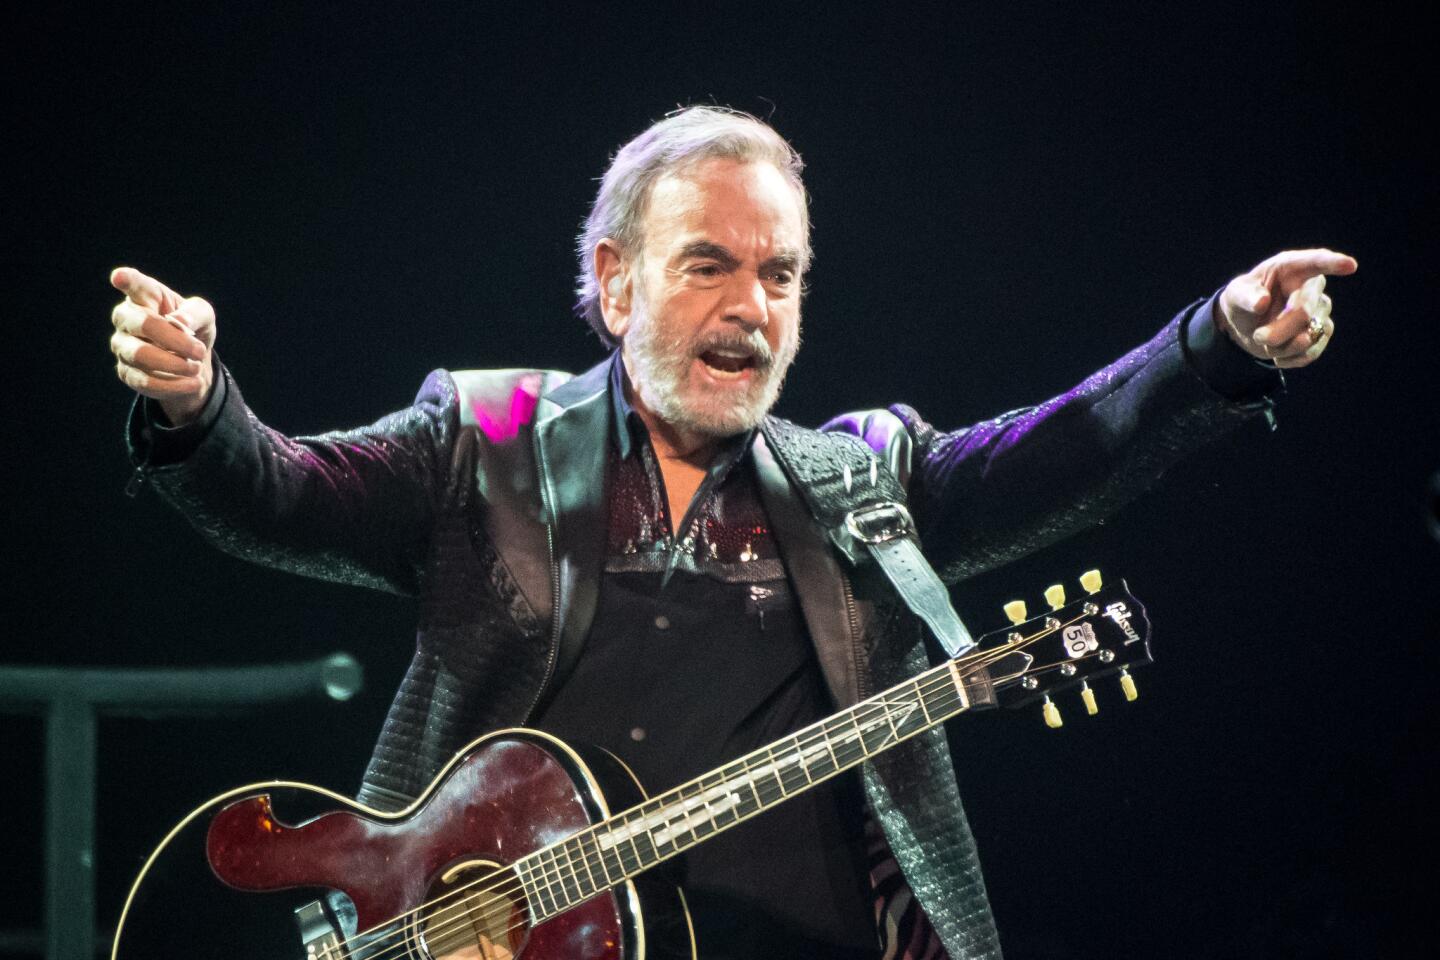 ‘This is so good!’:The Neil Diamond experience is coming to Bucks in……